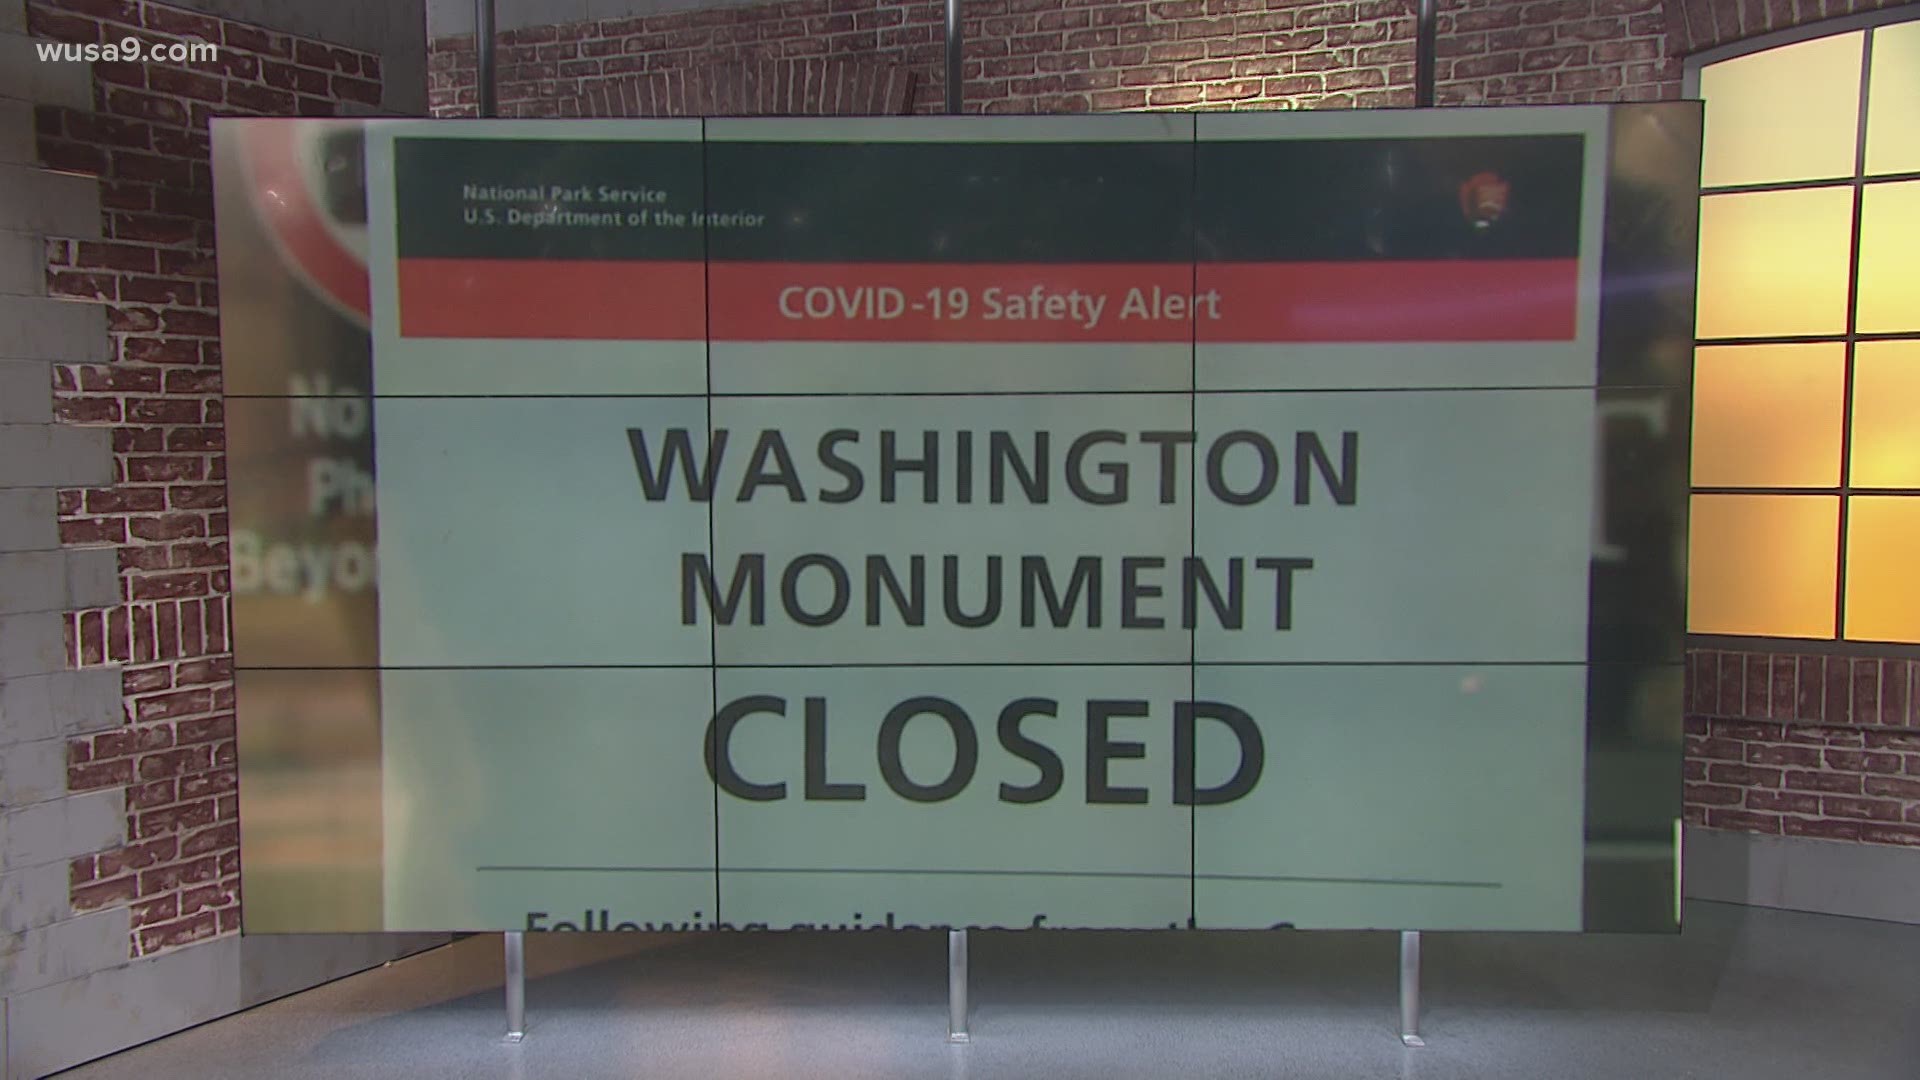 The monument was closed temporarily for coronavirus concerns